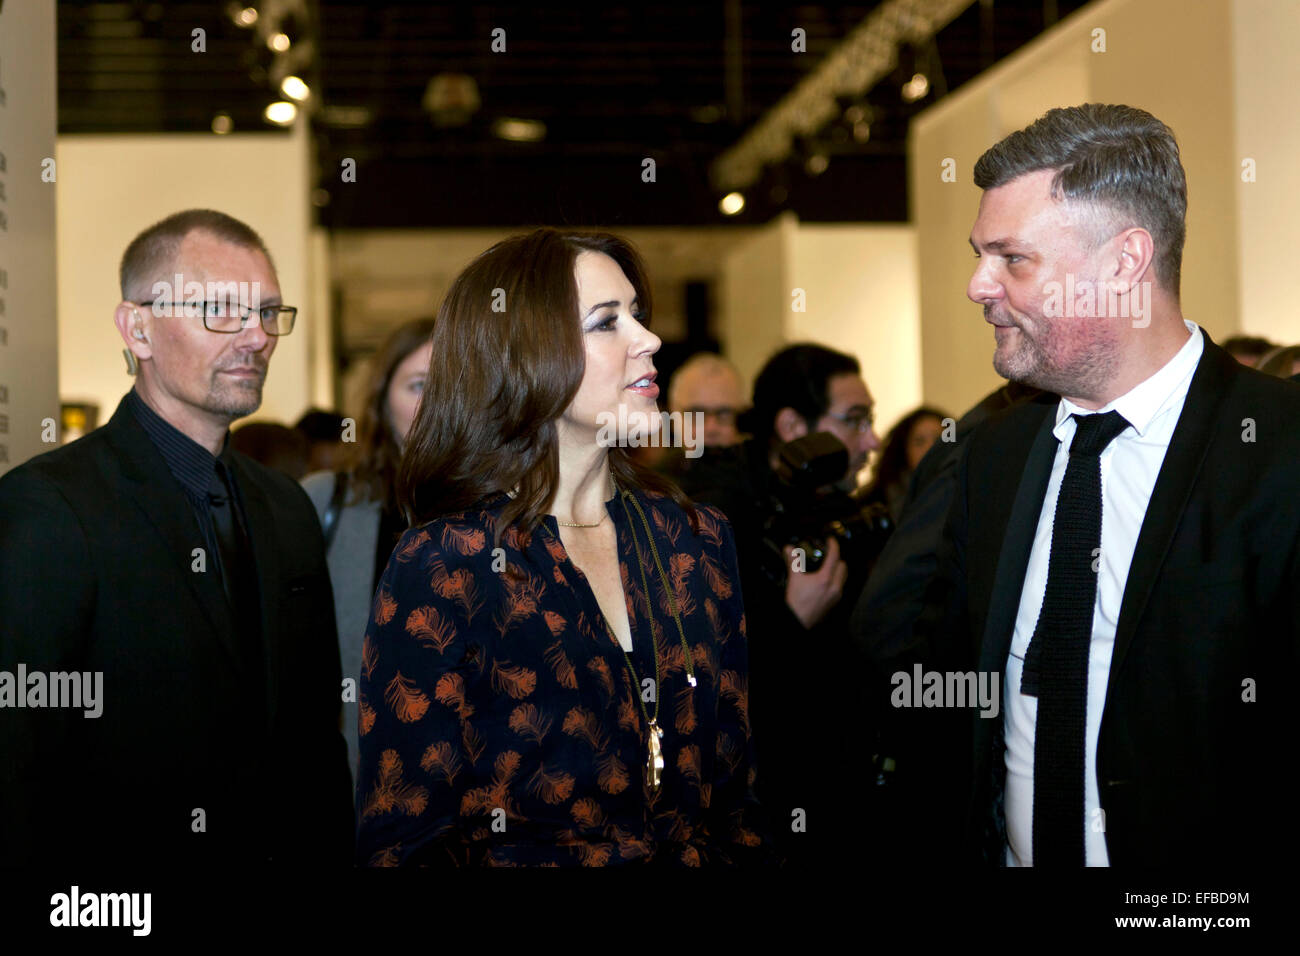 Copenhagen, Denmark. 30th January, 2015. HRH Danish Crown Princess Mary (photo, mid) discus this week’s fashion fairs with Kristian W. Andersen (photo, right), Director for Copenhagen International Fashion Fair (CIFF) during her visit to the CIFF venue in FORUM this Friday in Copenhagen.. Credit:  OJPHOTOS/Alamy Live News Stock Photo